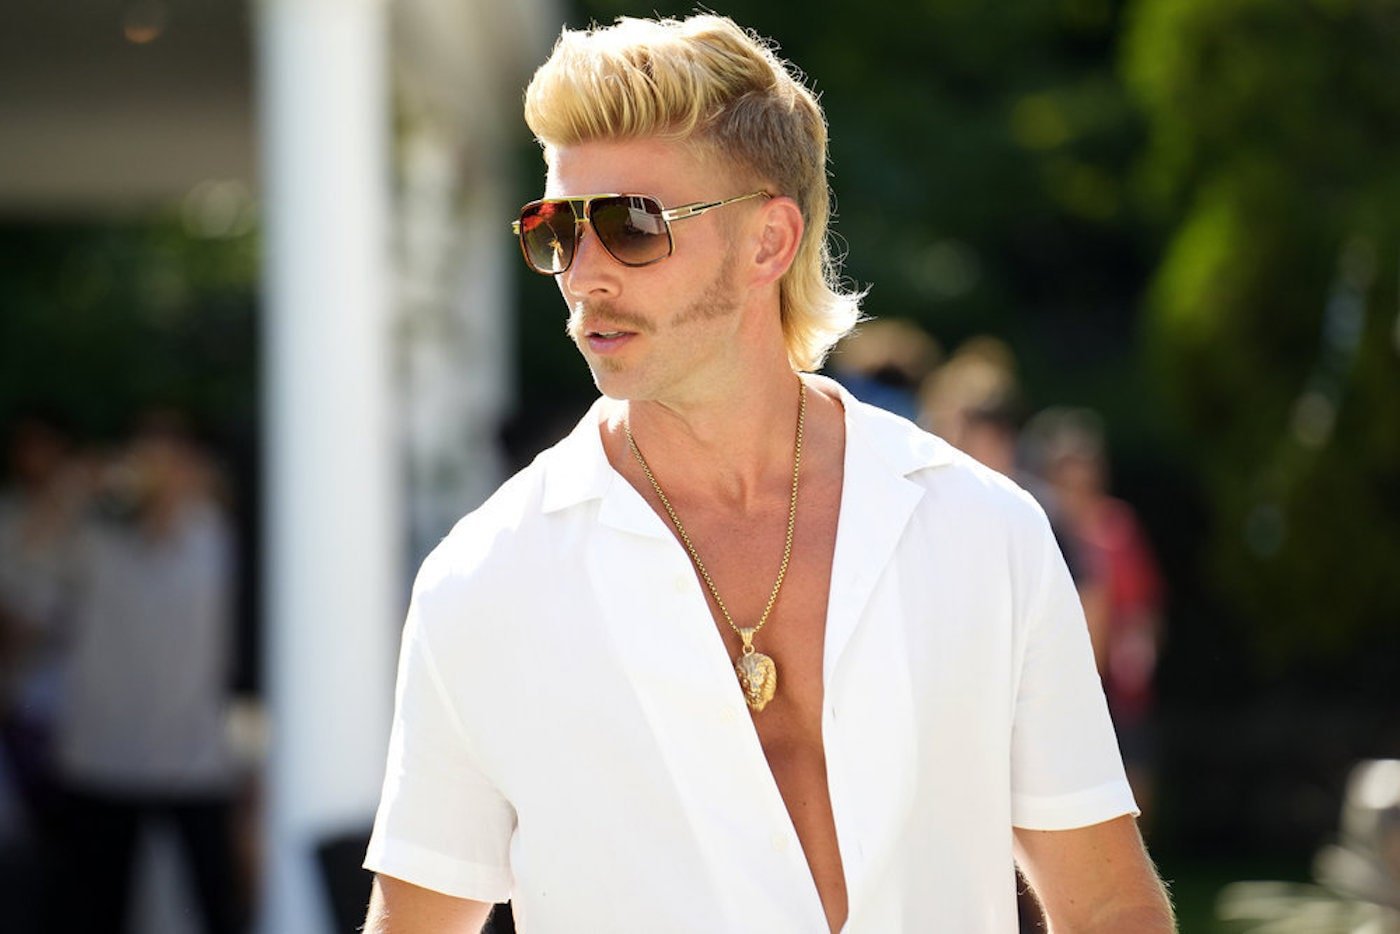 Kyle Cooke from 'Summer House' wears sunglasses and a white shirt